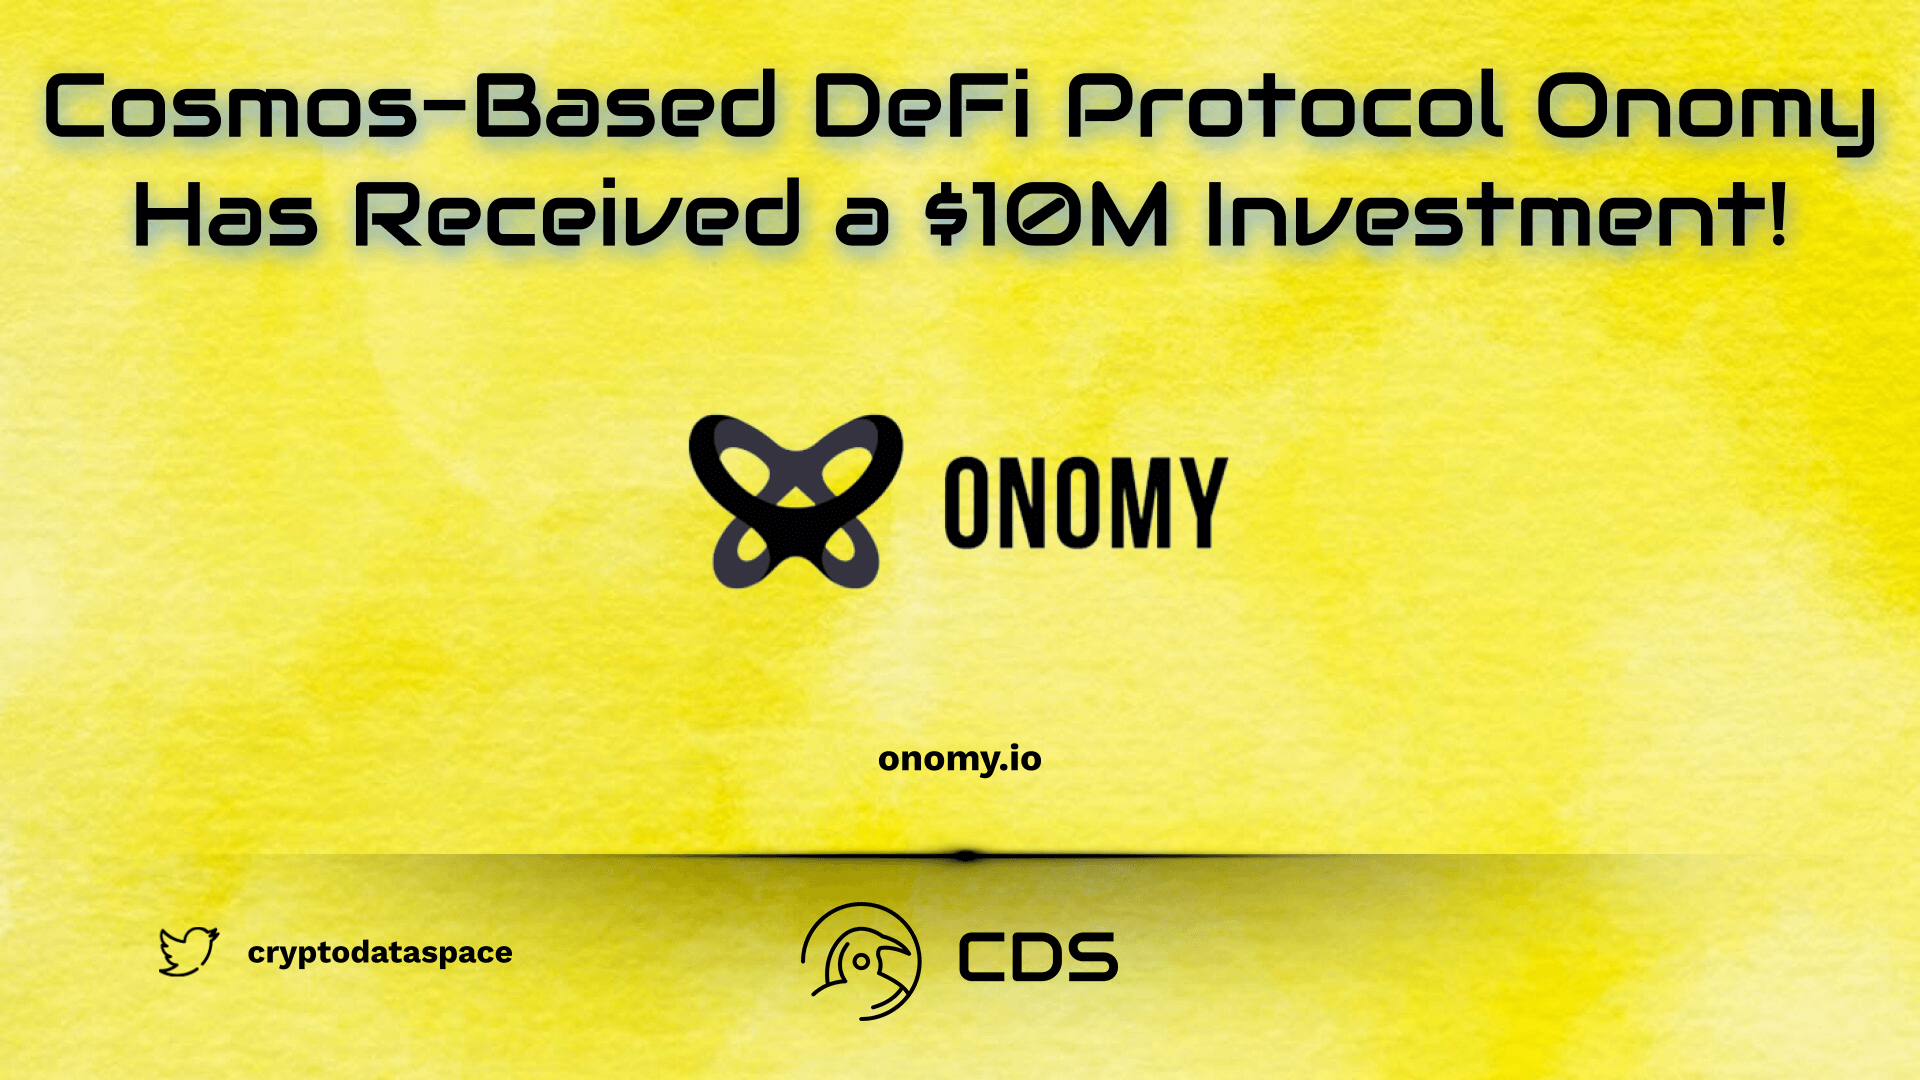 Cosmos-Based DeFi Protocol Onomy Has Received a $10M Investment!